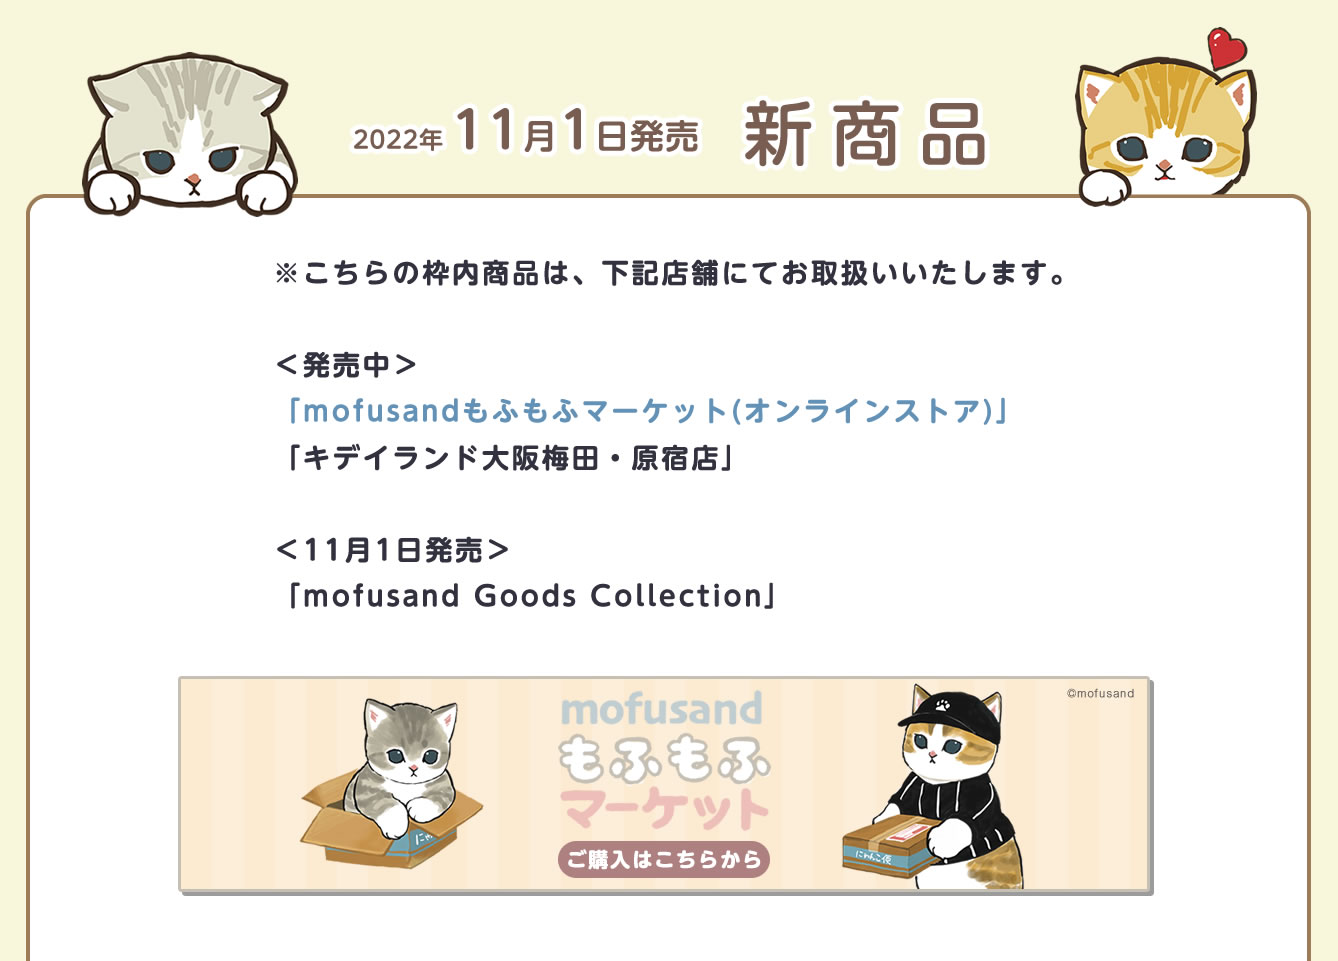 mofusand Goods Collection 火～イベント情報